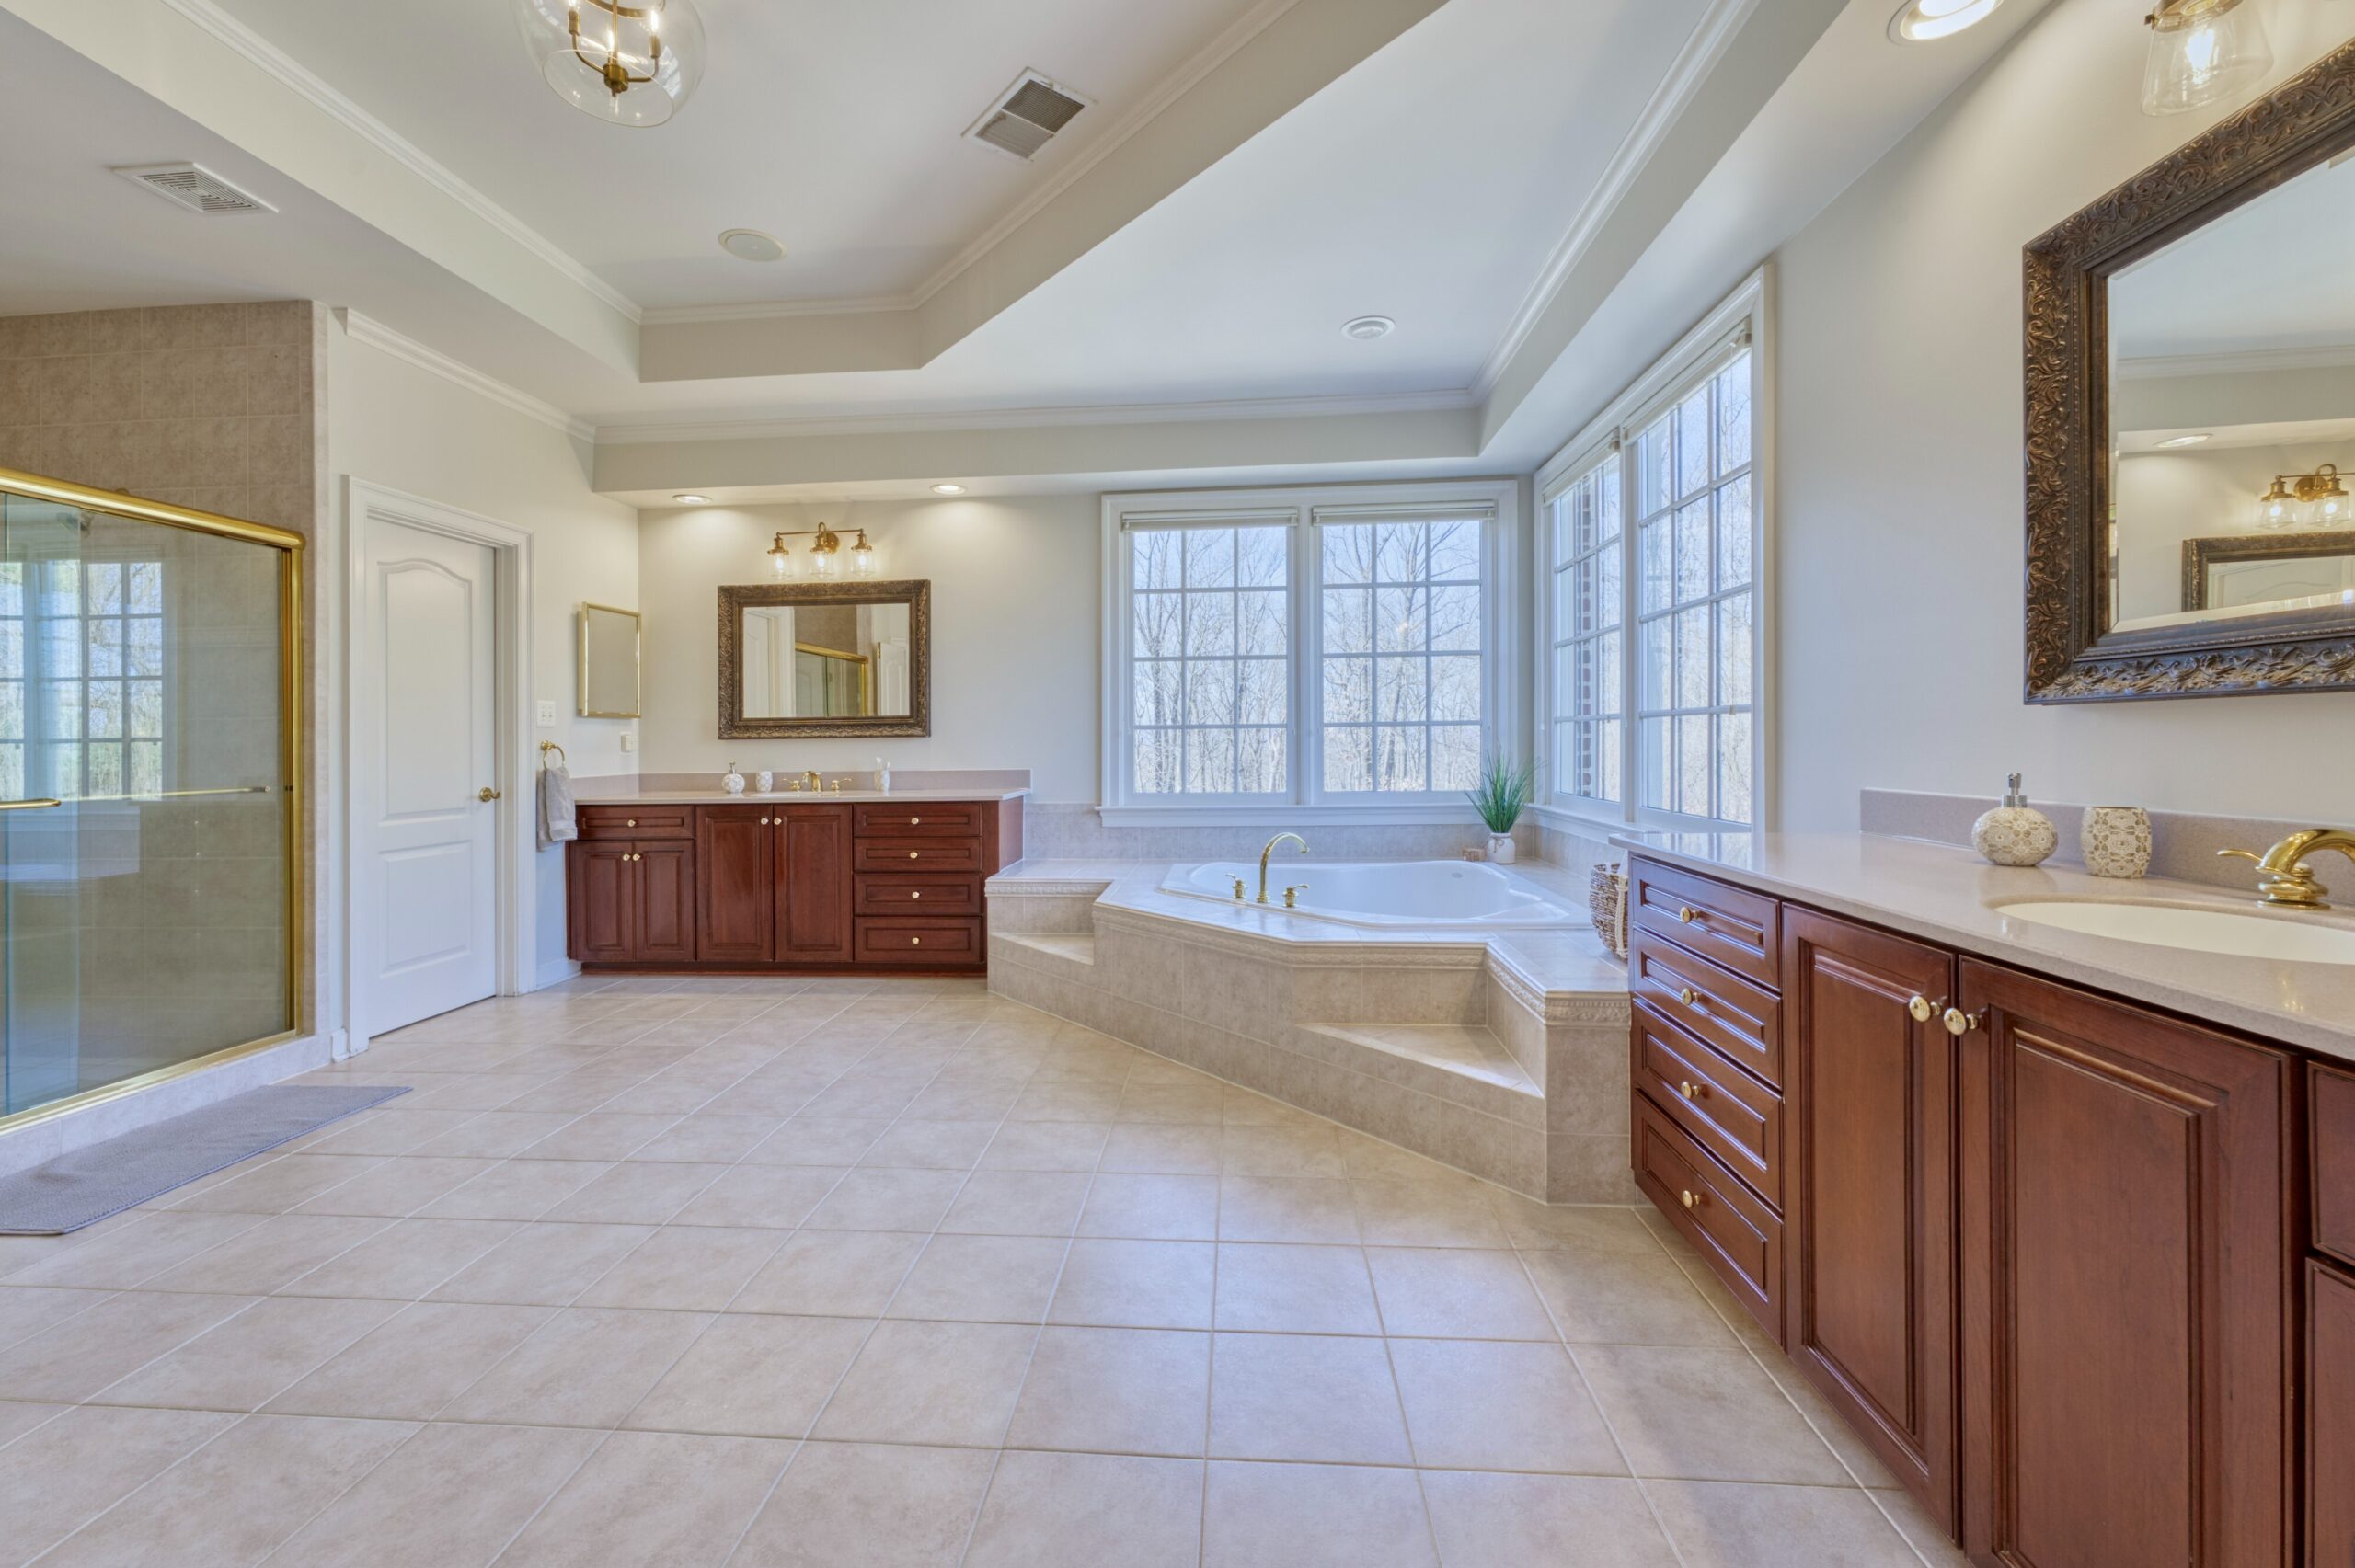 Professional interior photo of 17087 Bold Venture Drive, Leesburg - showing the primary bathroom with separate vanities, soaking tub in the corner windows and large shower